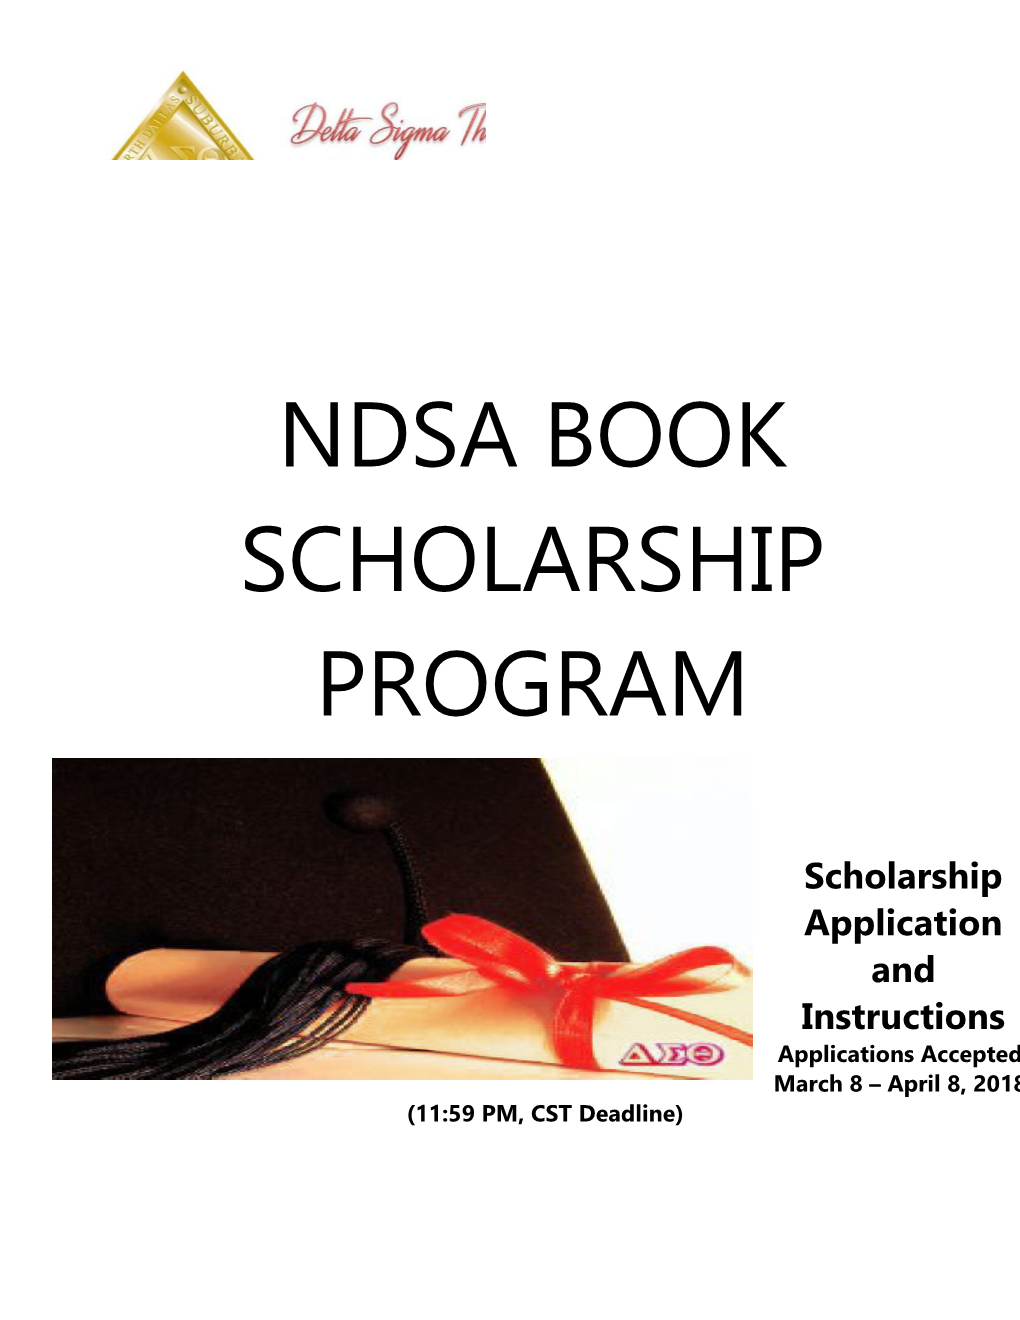 Scholarship Application and Instructions